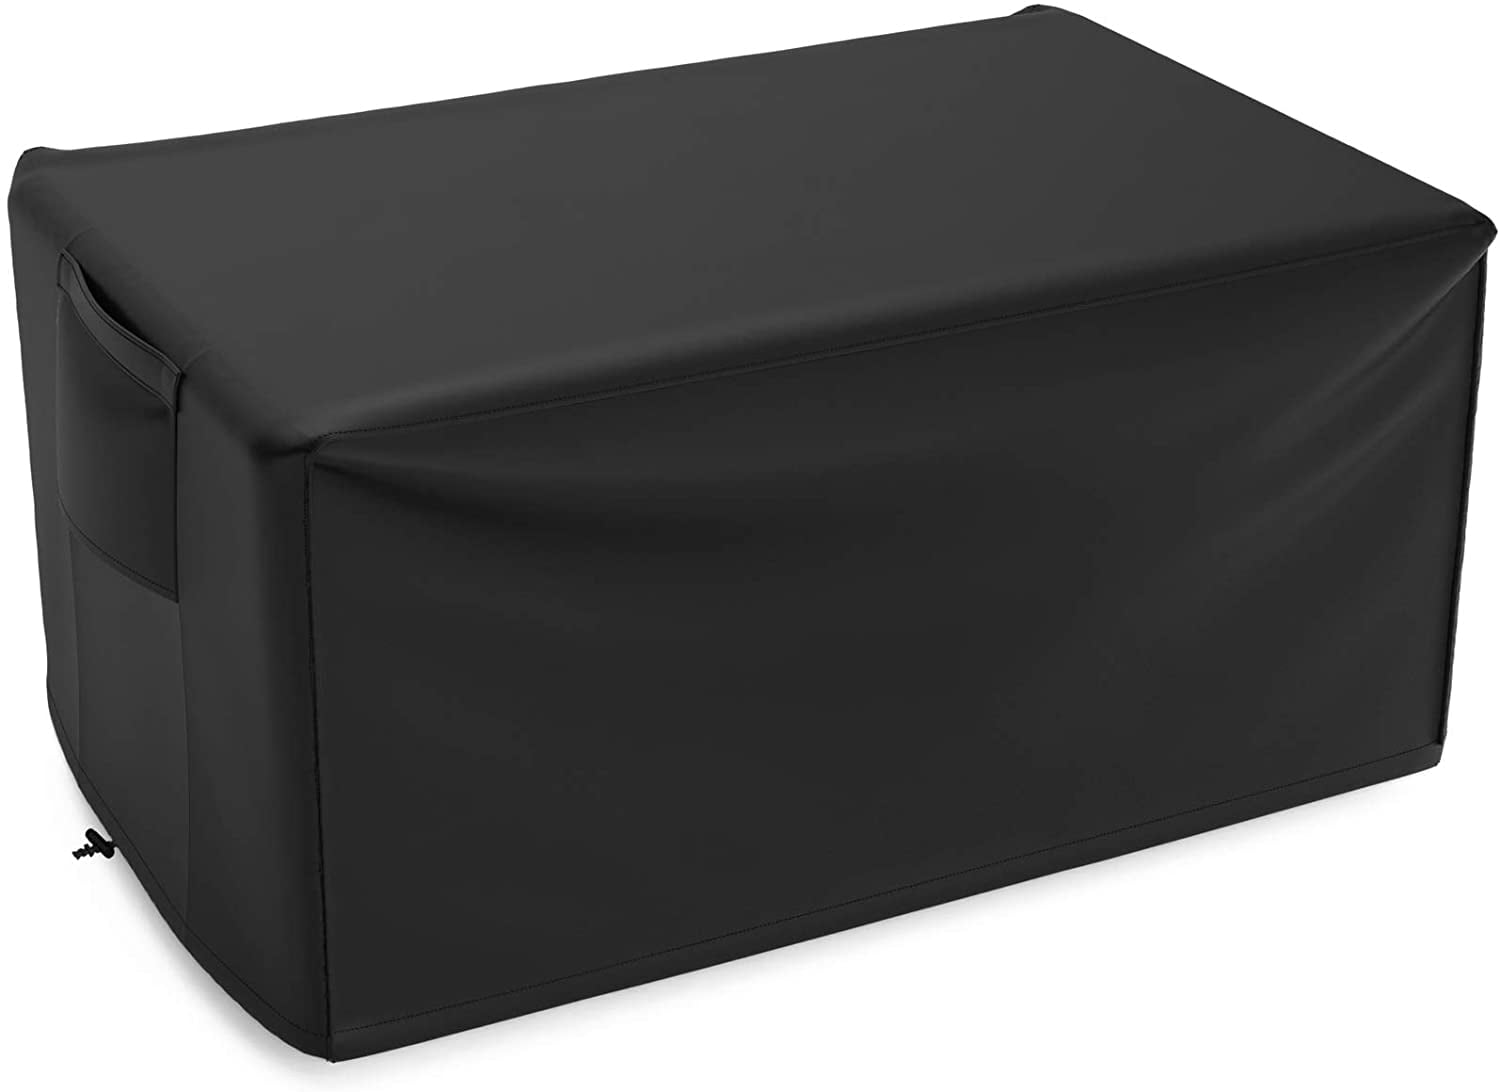 NUPICK 44 Inch Fire Pit Cover for Outland Living 401 Propane Fire Table Heavy D 